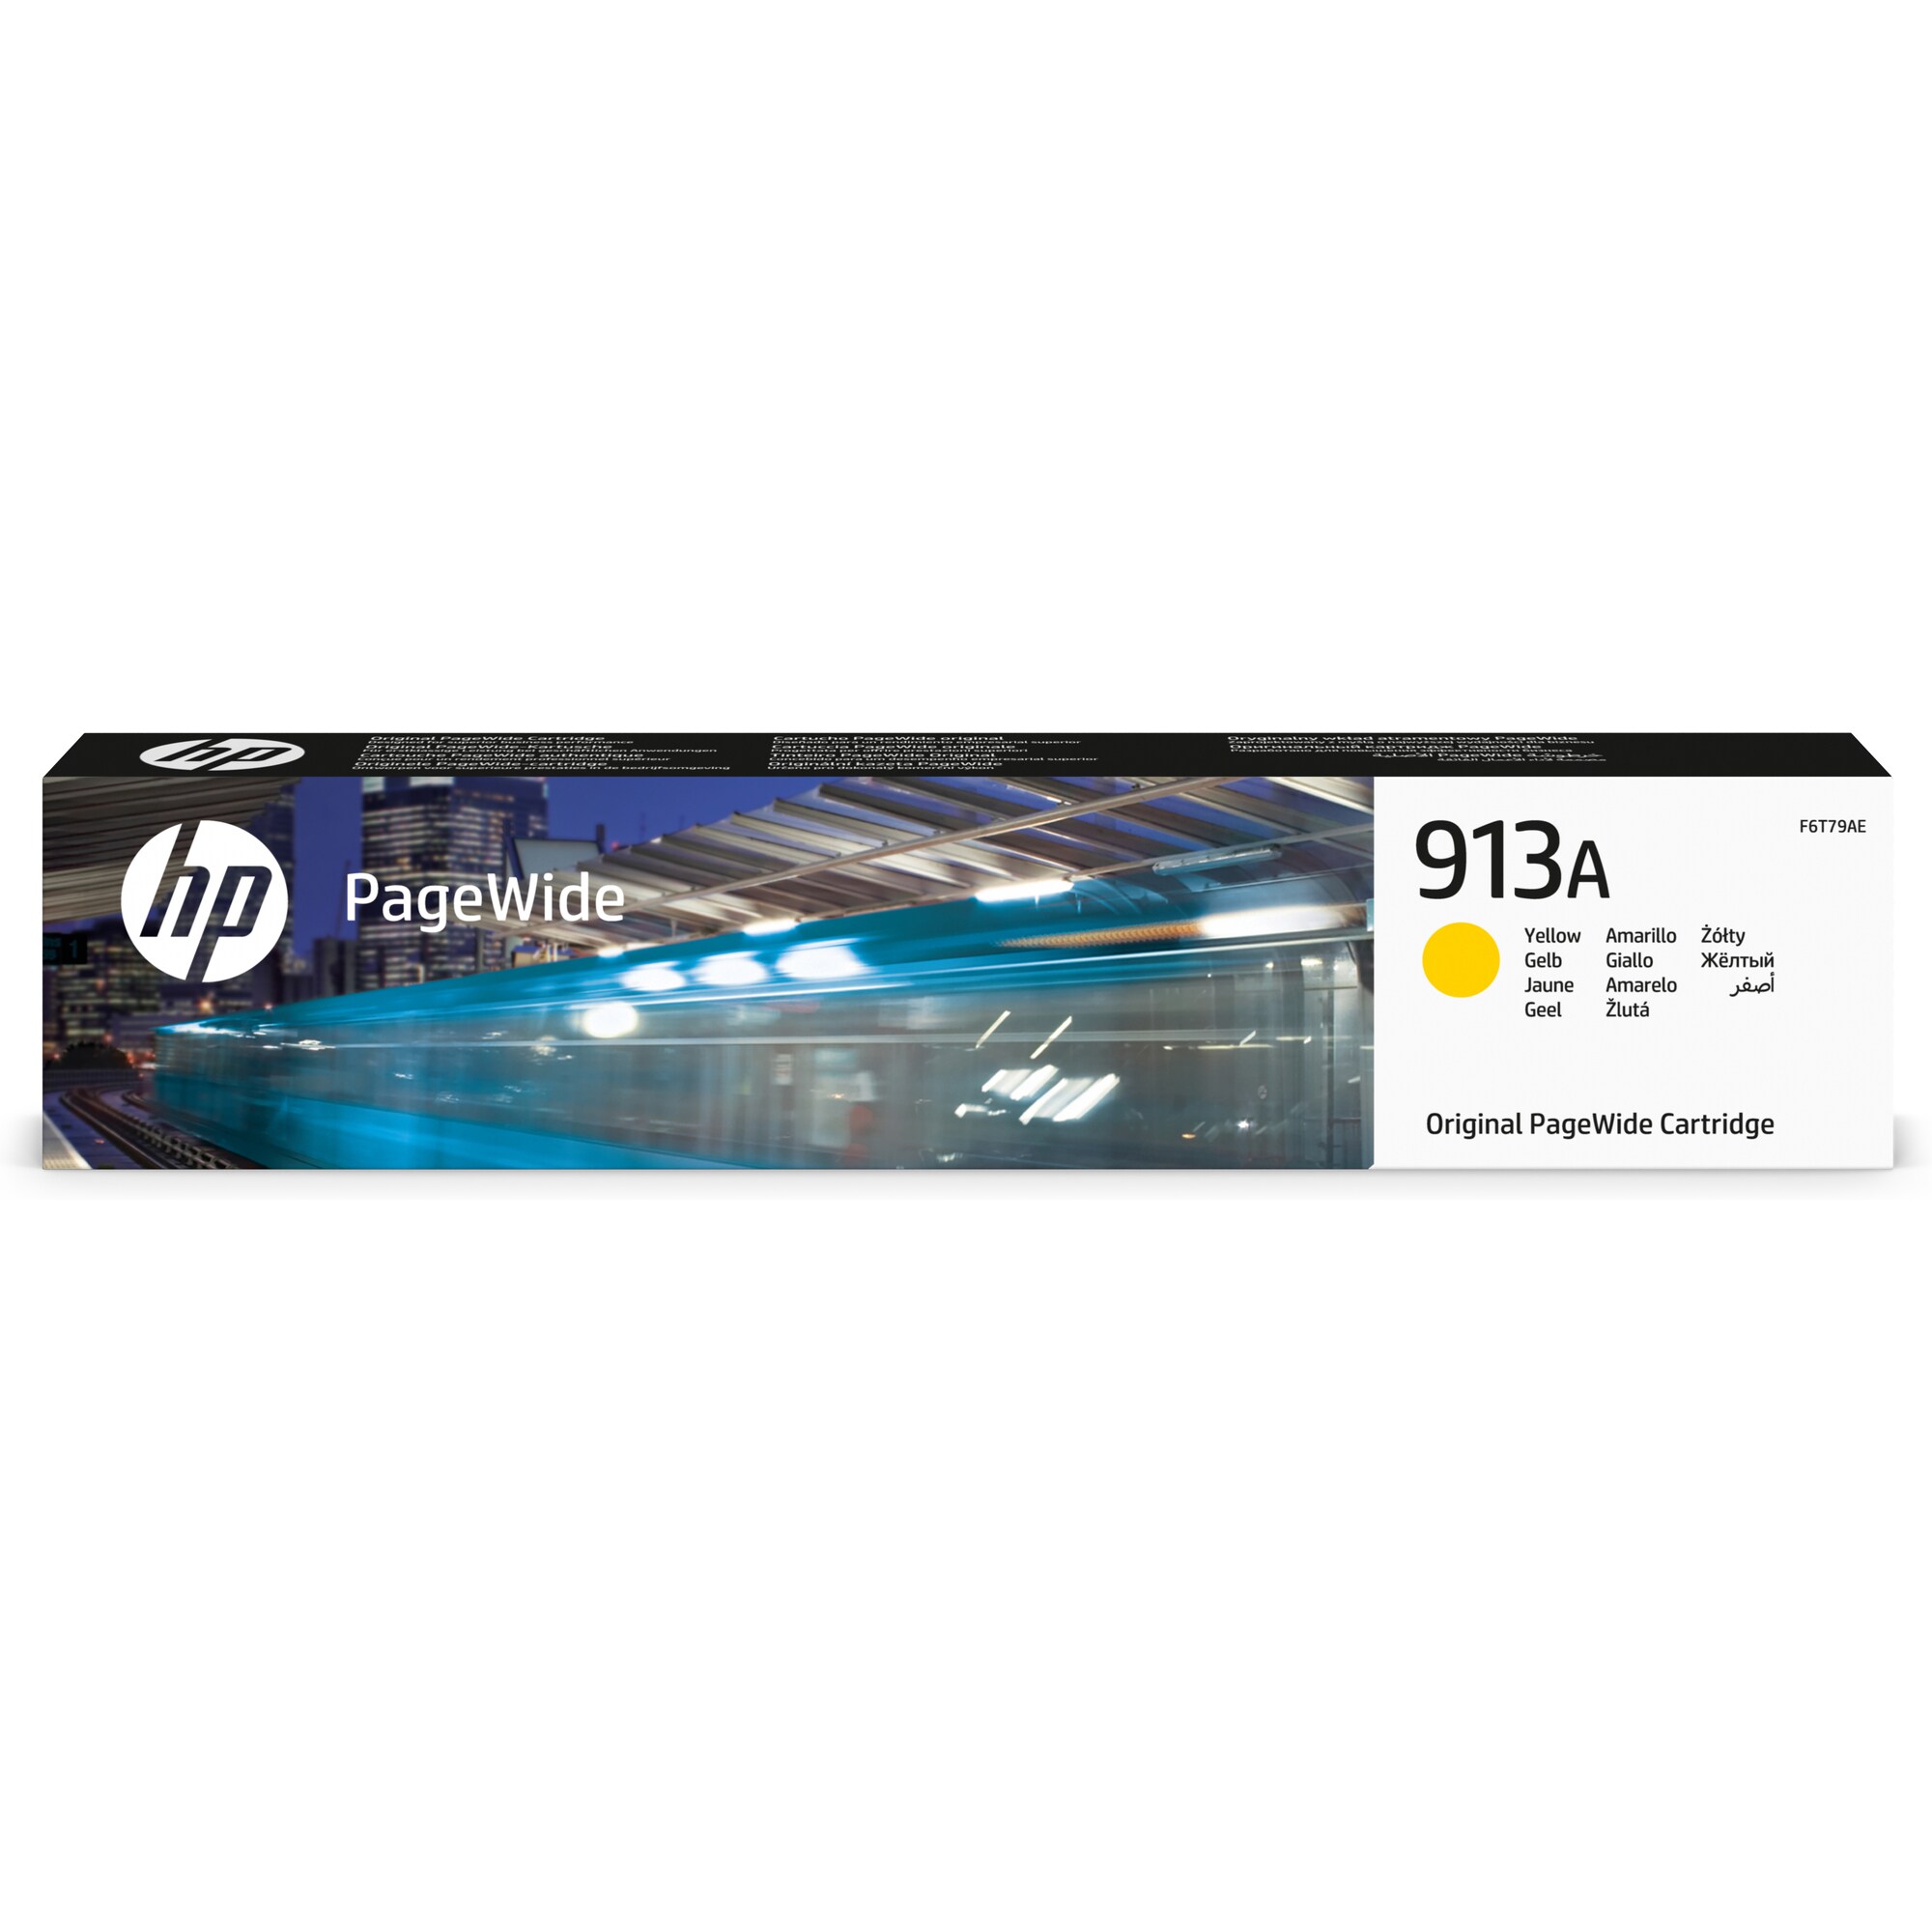 HP 913A Yellow Original PageWide Cartridge (3, 000 pages)0 